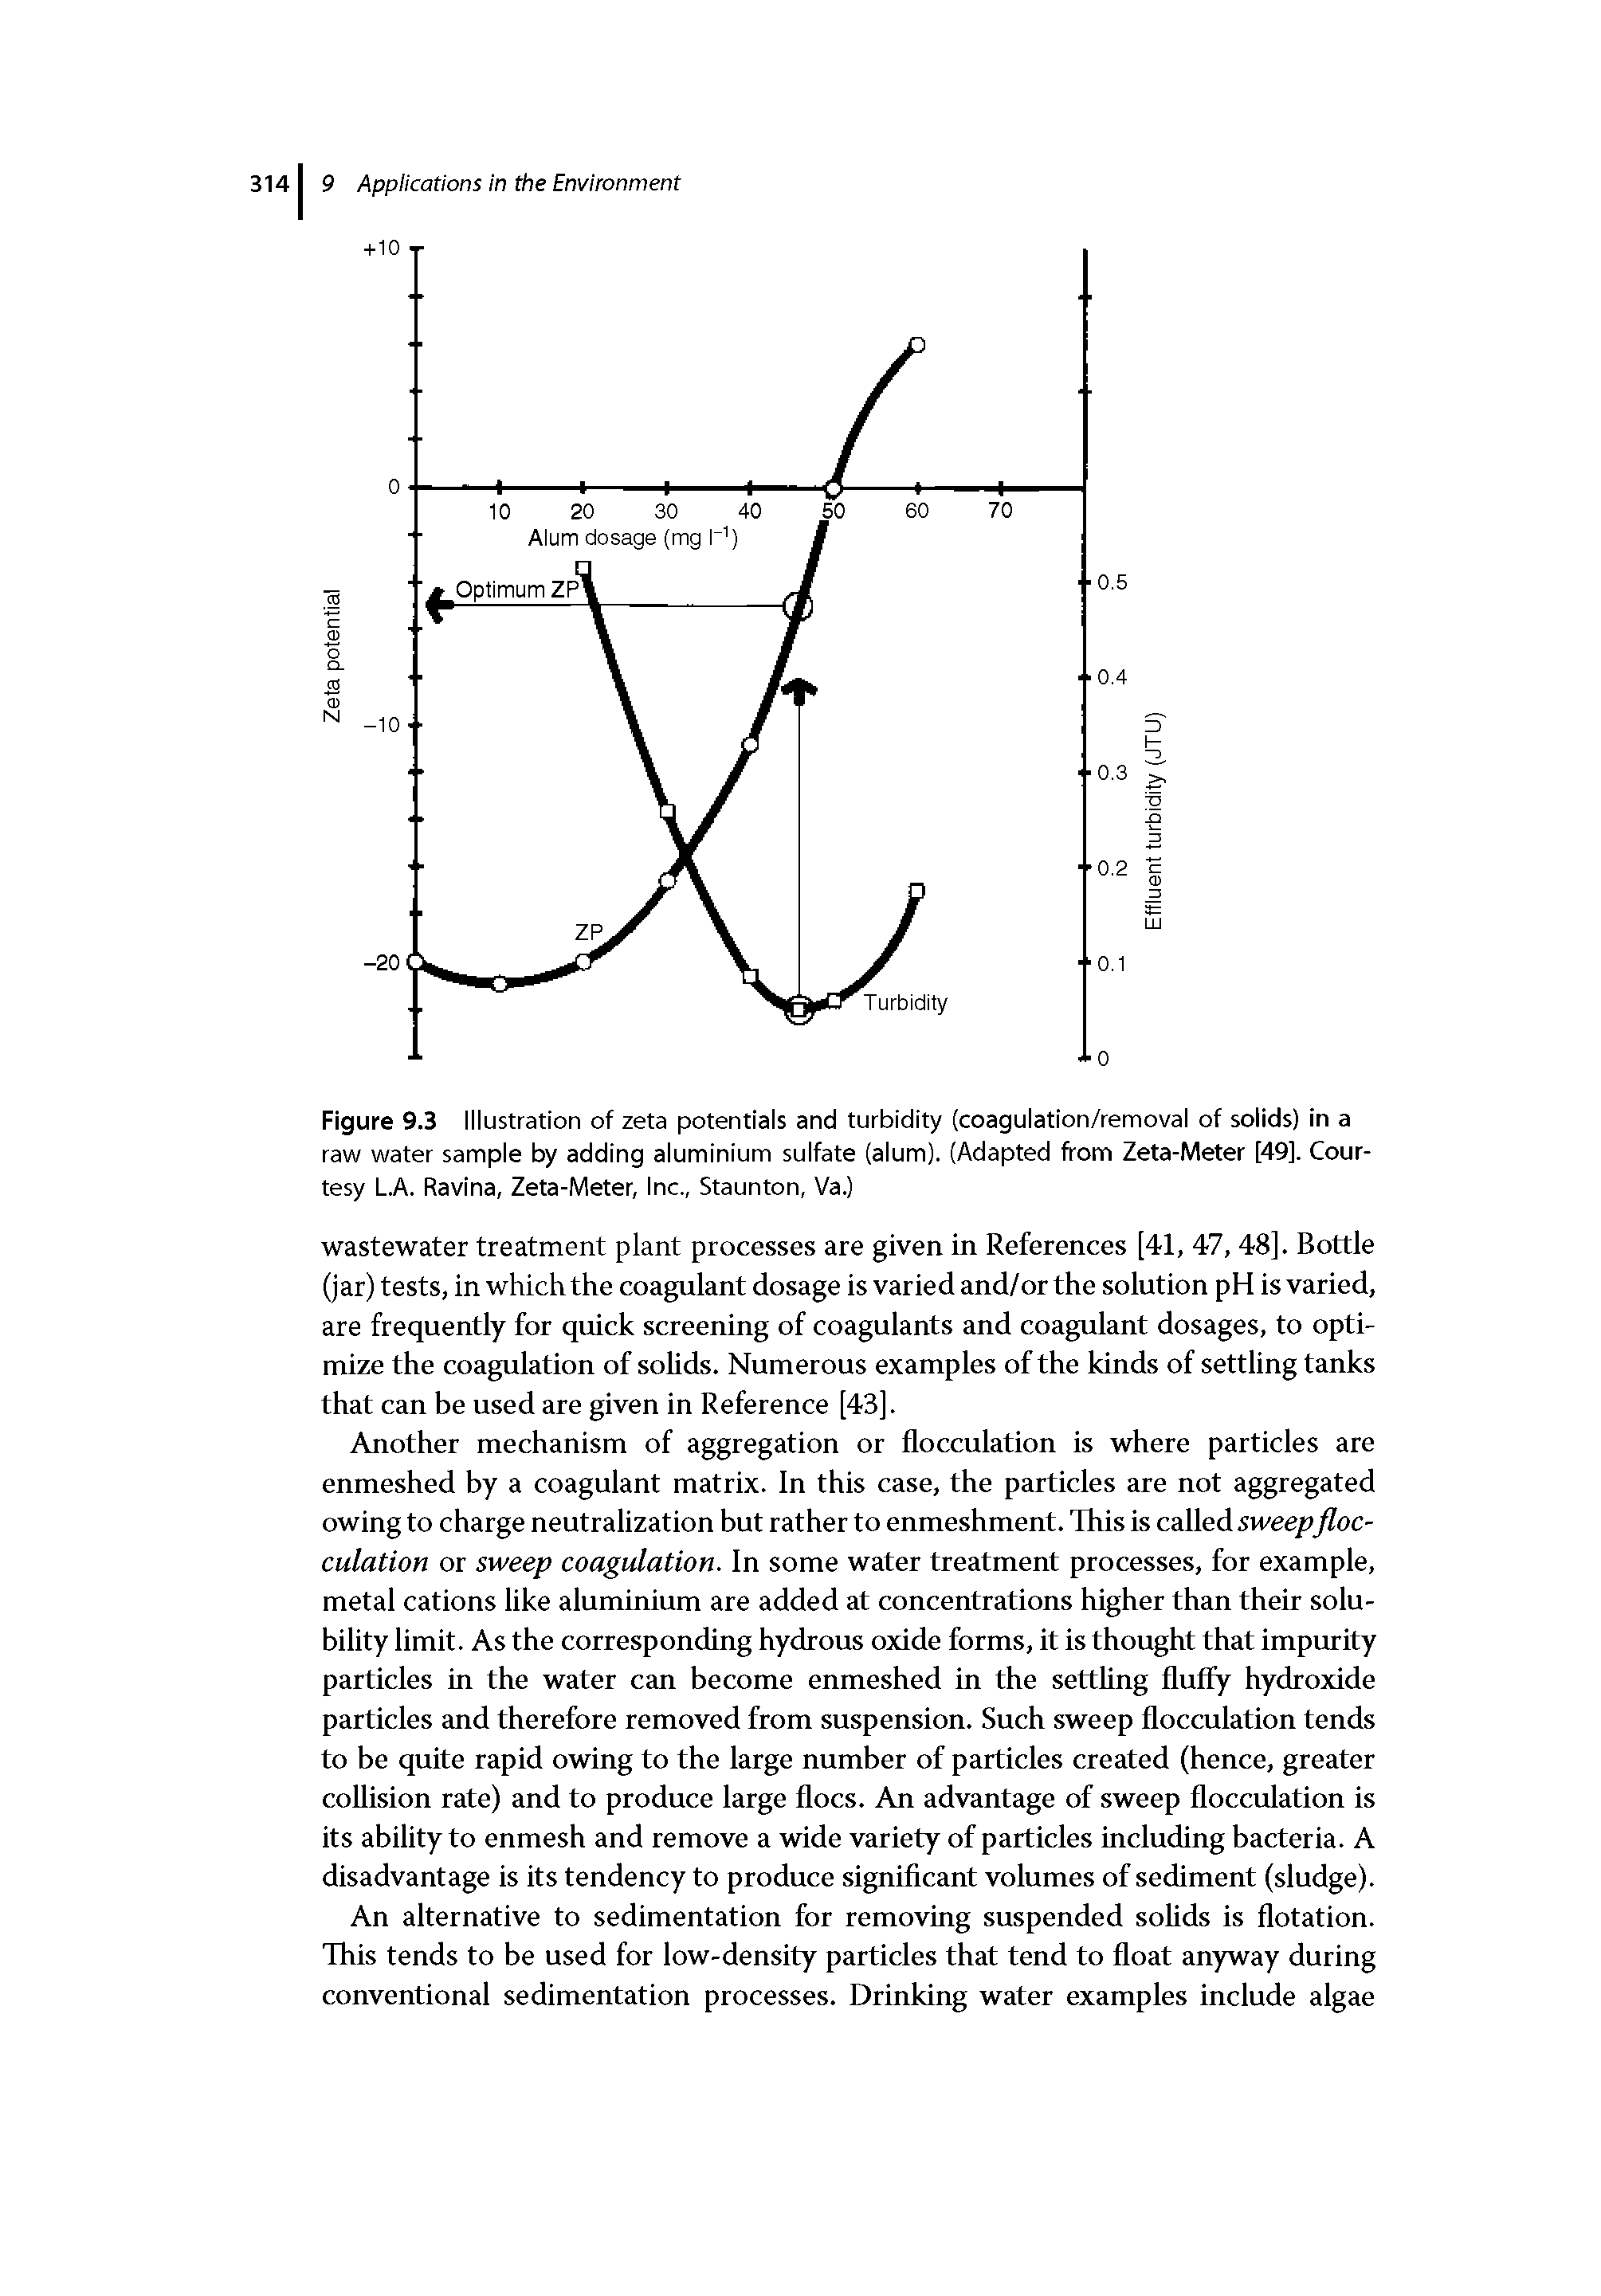 Figure 9.3 Illustration of zeta potentials and turbidity (coagulation/removal of solids) in a raw water sample by adding aluminium sulfate (alum). (Adapted from Zeta-Meter [49]. Courtesy L.A. Ravina, Zeta-Meter, Inc., Staunton, Va.)...